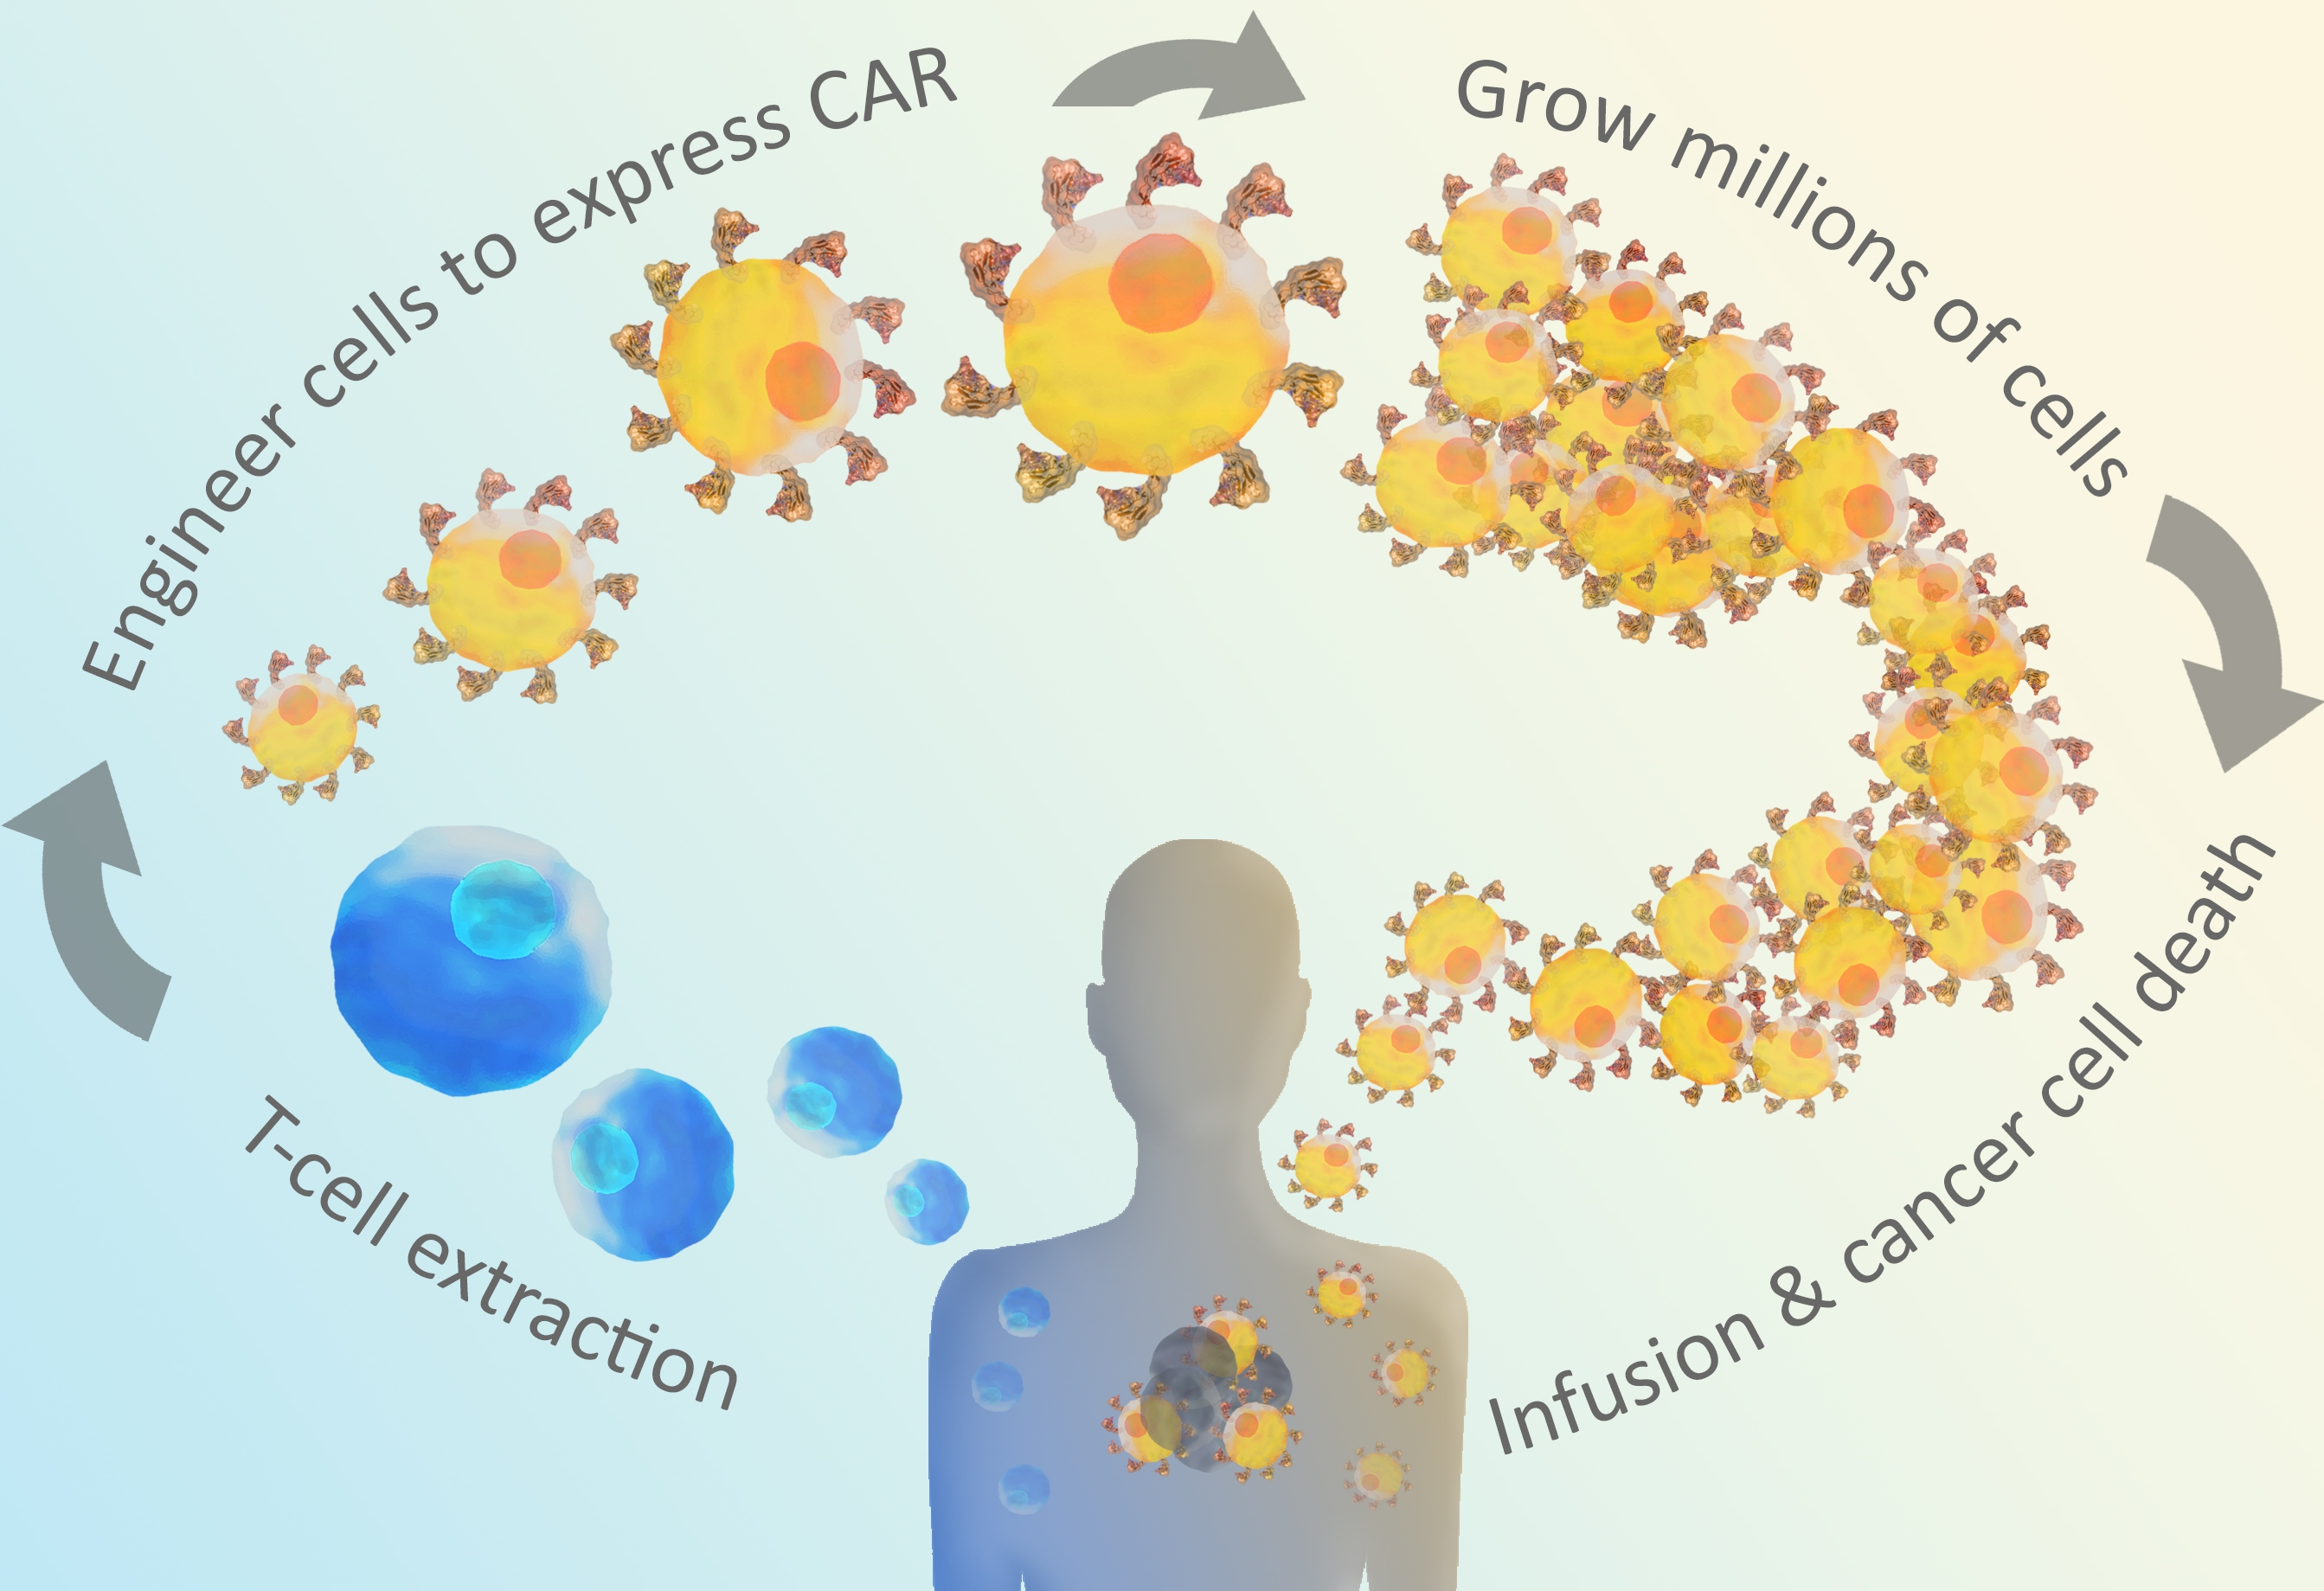 CAR-T Cell Therapy